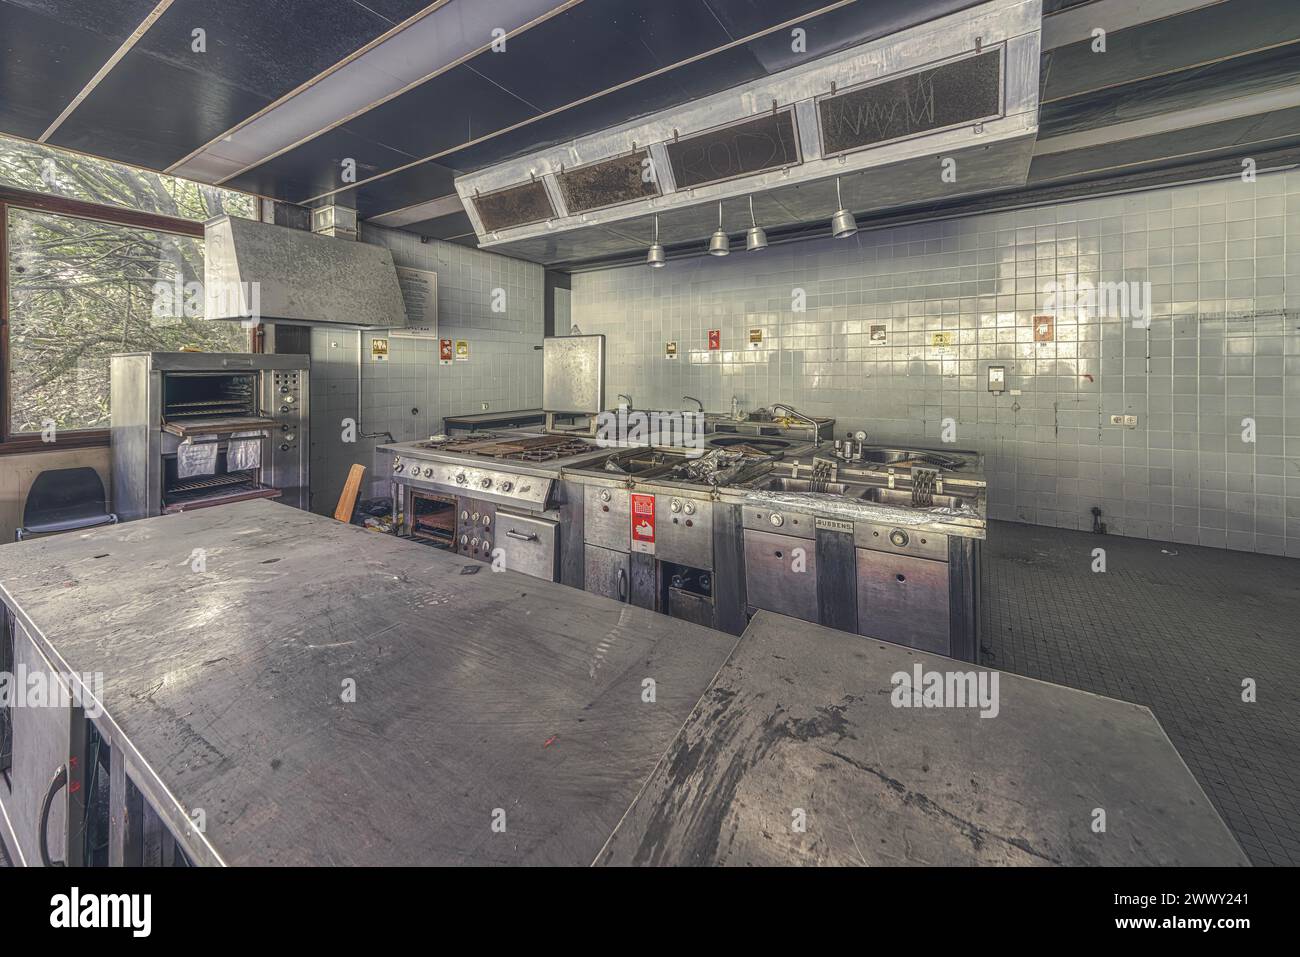 Centre of an abandoned industrial kitchen with visible signs of use on the appliances, Institute of Molecular Biology, Lost Place Stock Photo